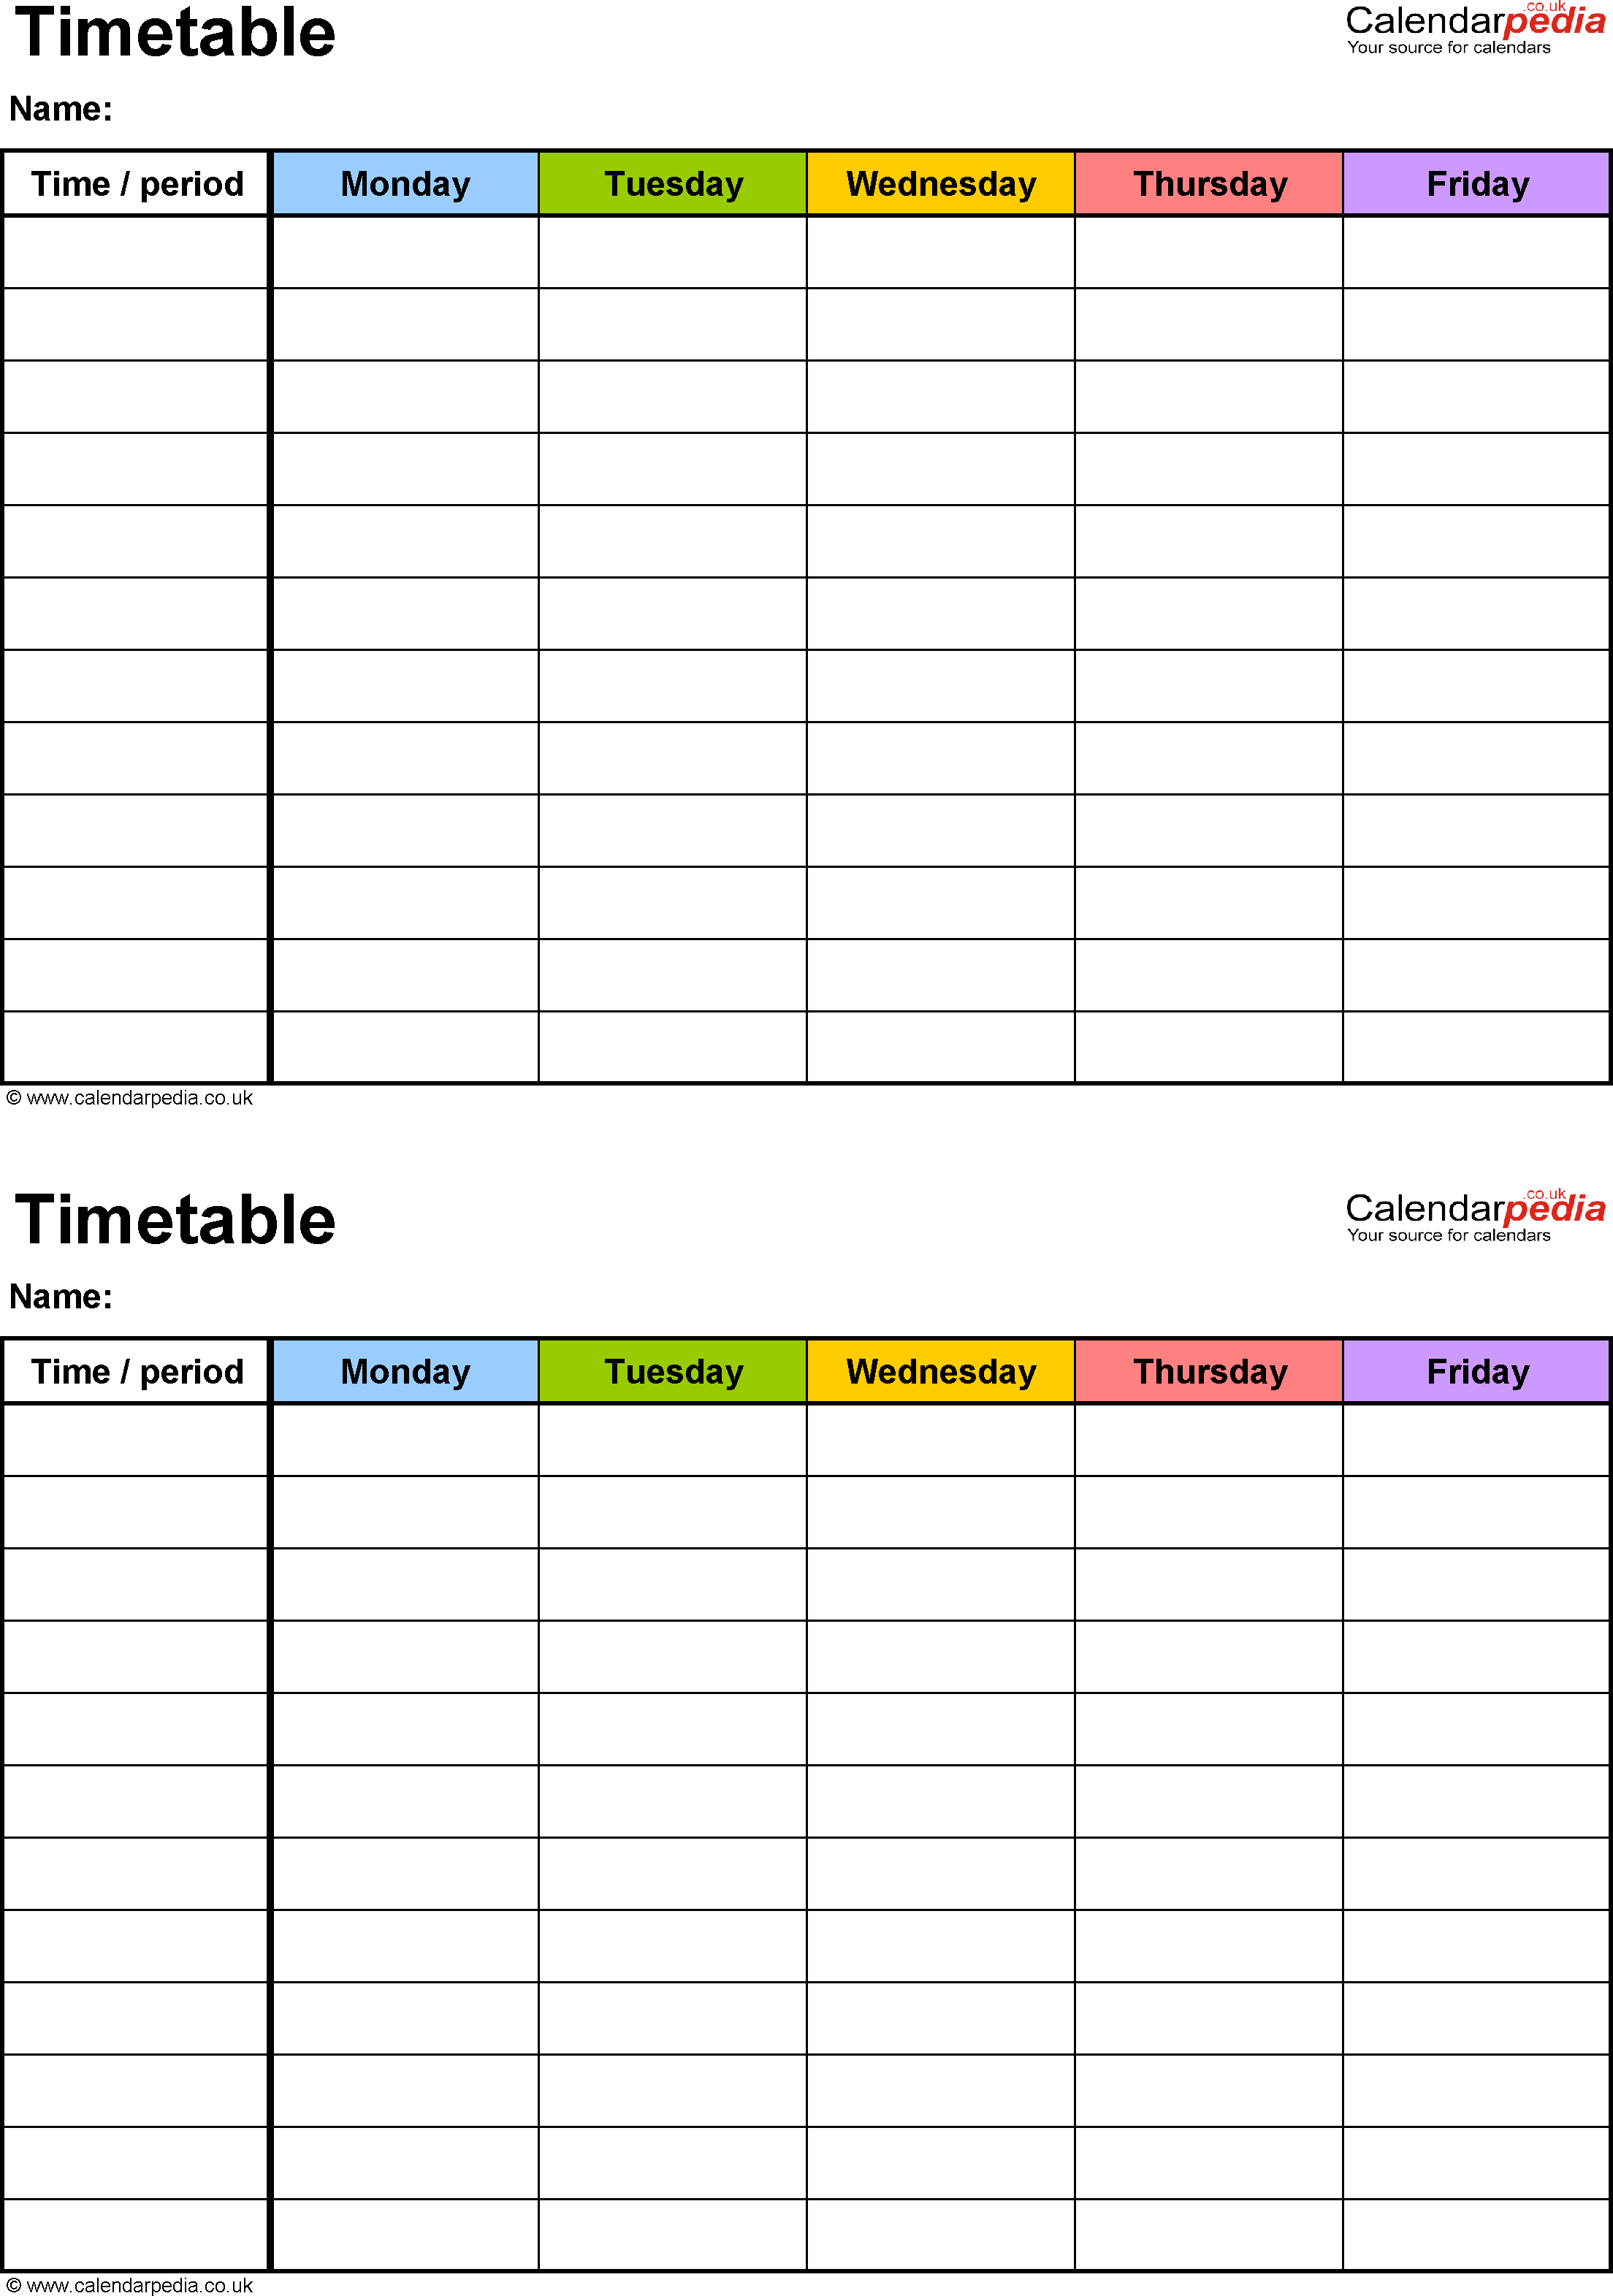 Excel Timetable Template 6: 2 A5 Timetables On One Page within 5 Day Weekly Calendar